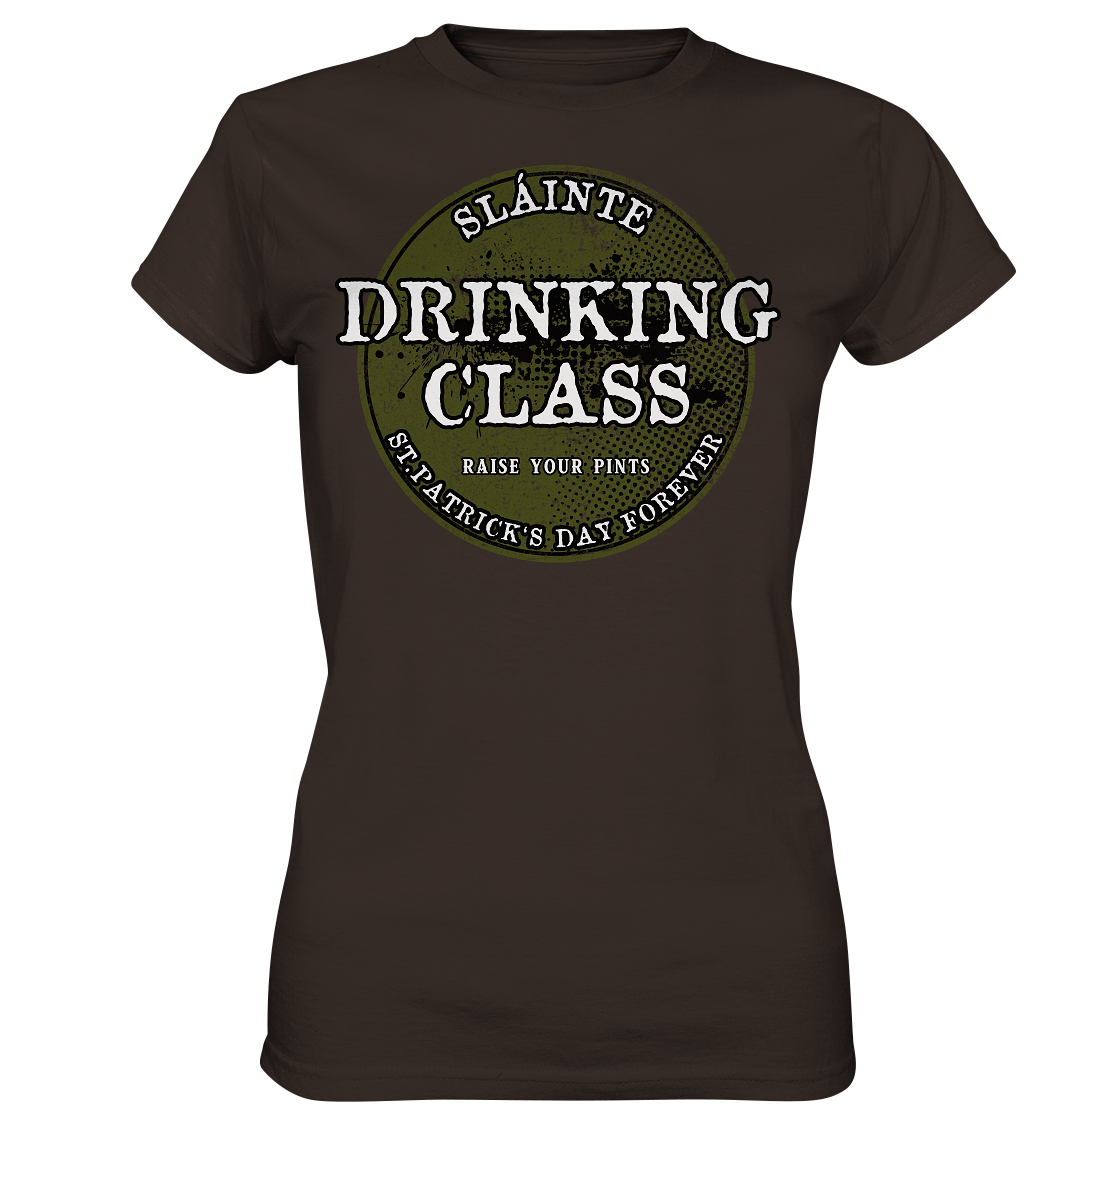 Drinking Class "St.Patrick's Day Forever" - Ladies Premium Shirt